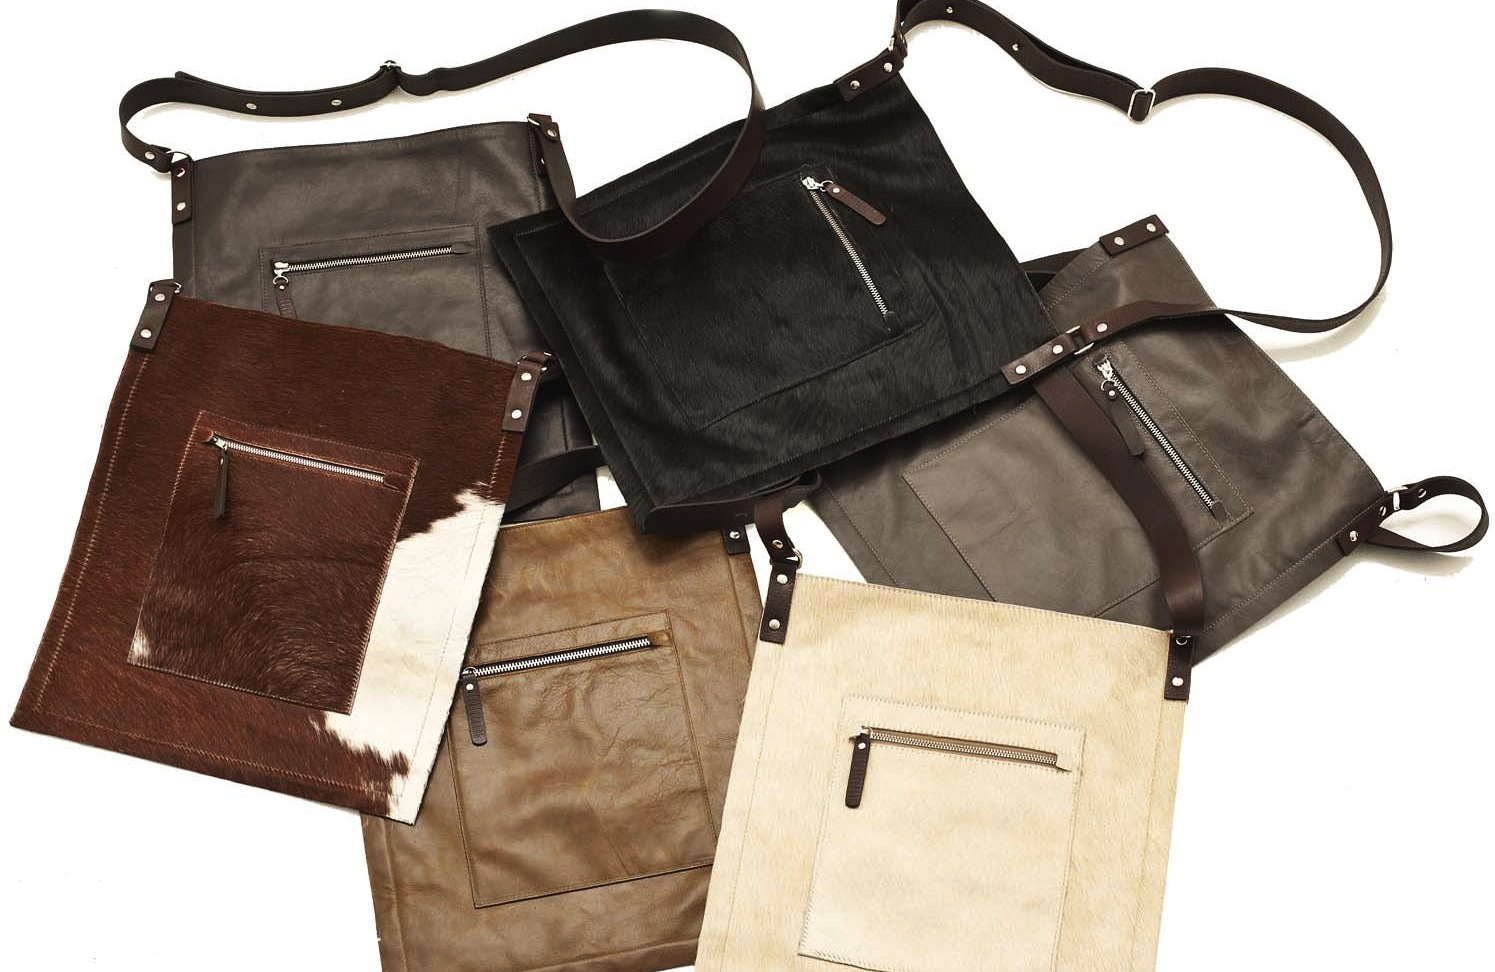 Convict Leather Messenger Bag - The Australian Made Campaign